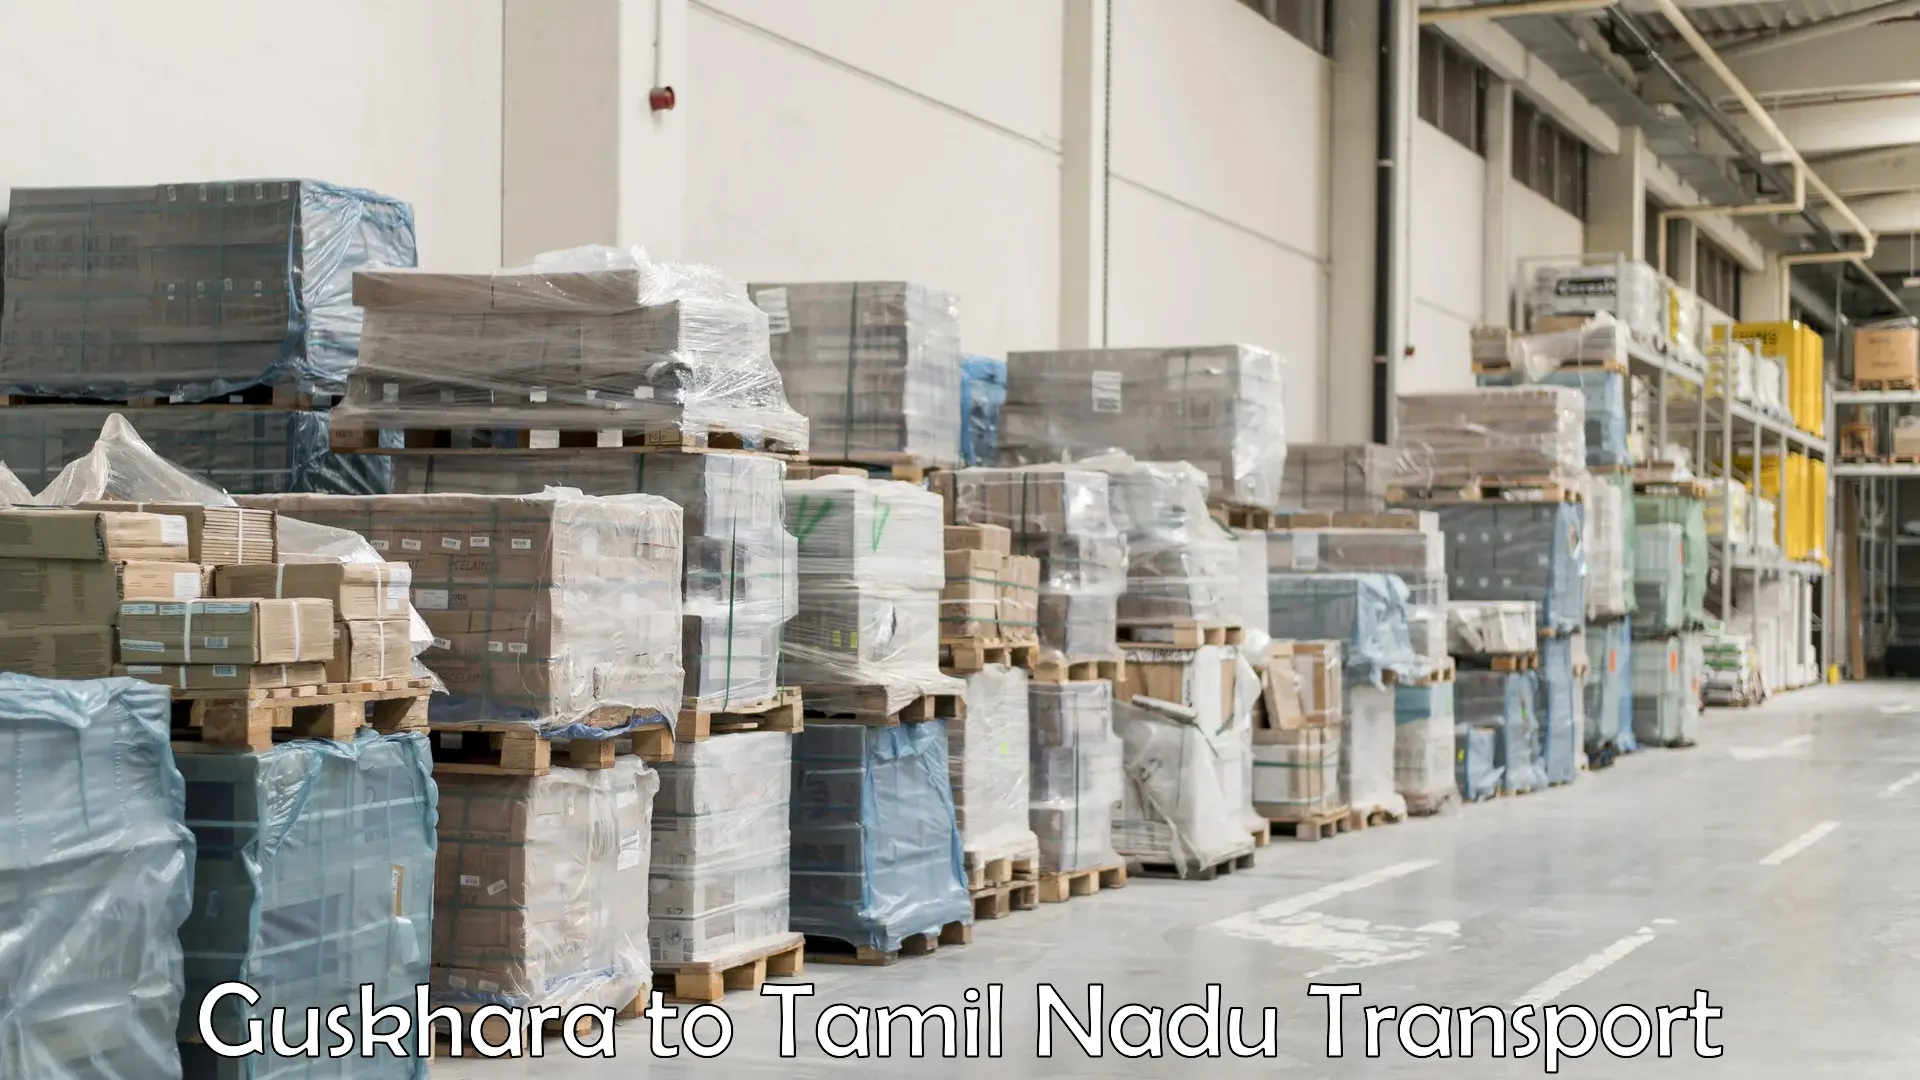 Truck transport companies in India Guskhara to Vellore